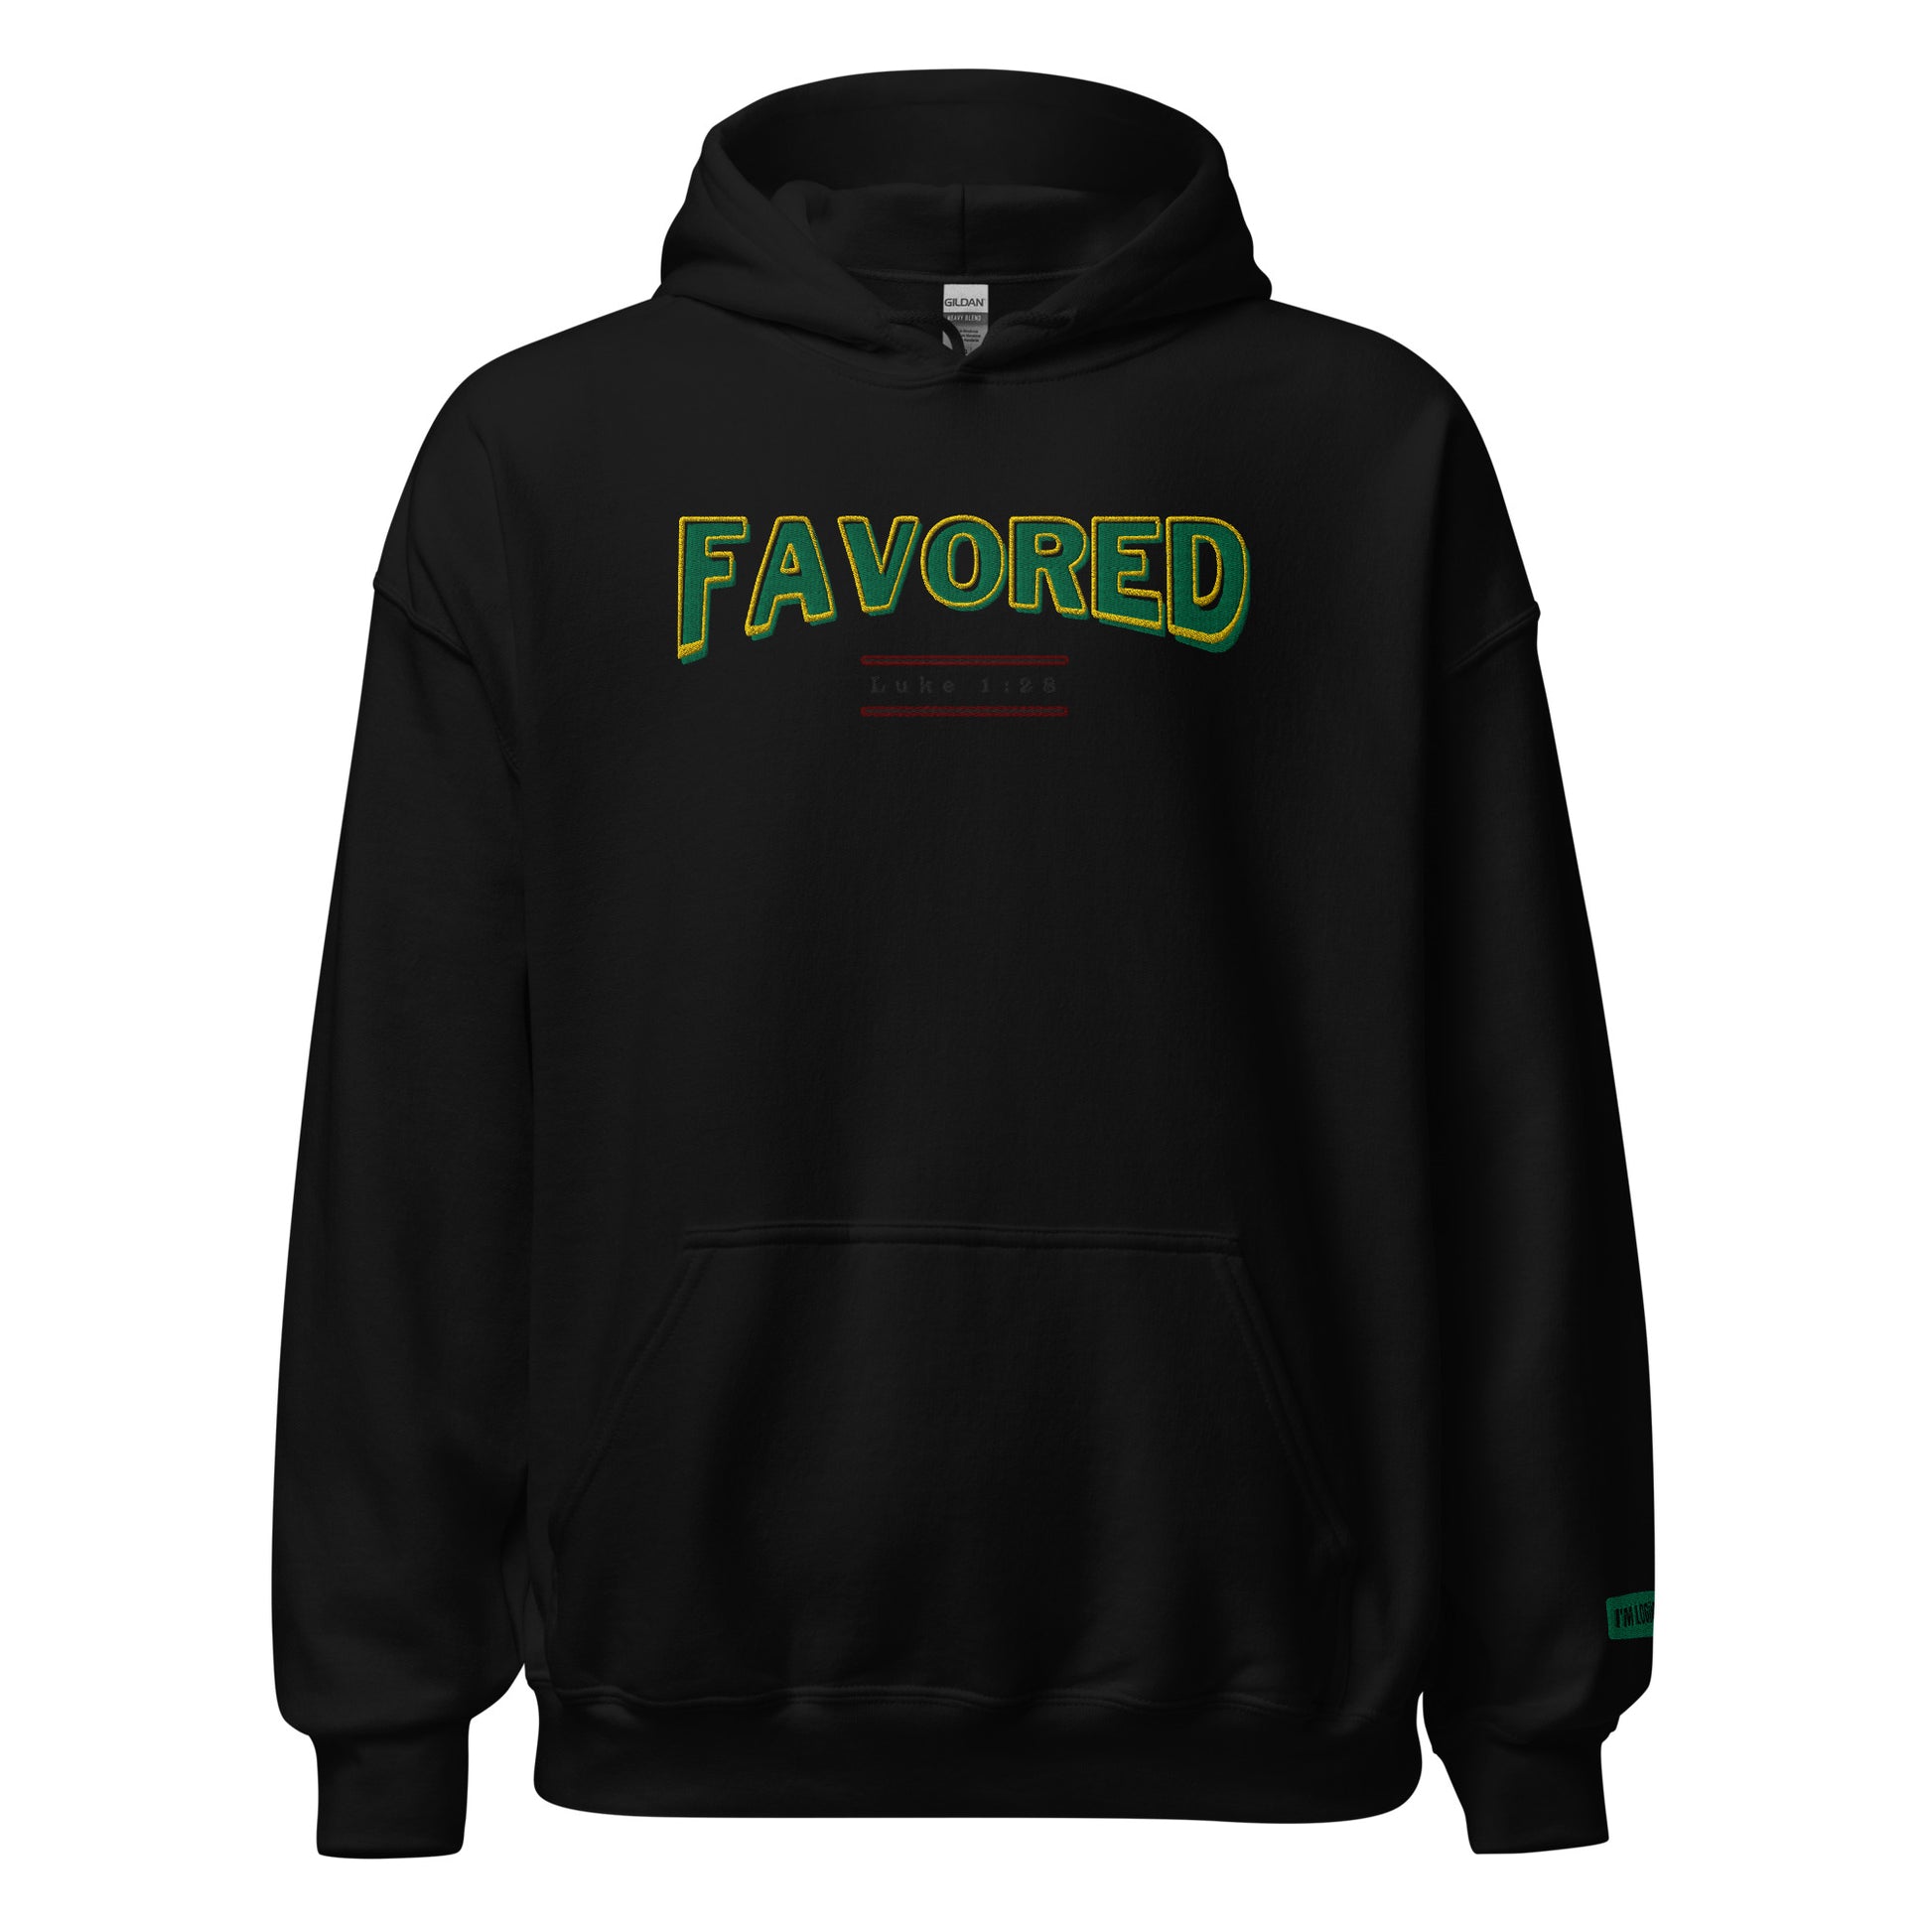 Favored Embroidery Unisex Hoodie - Black / S